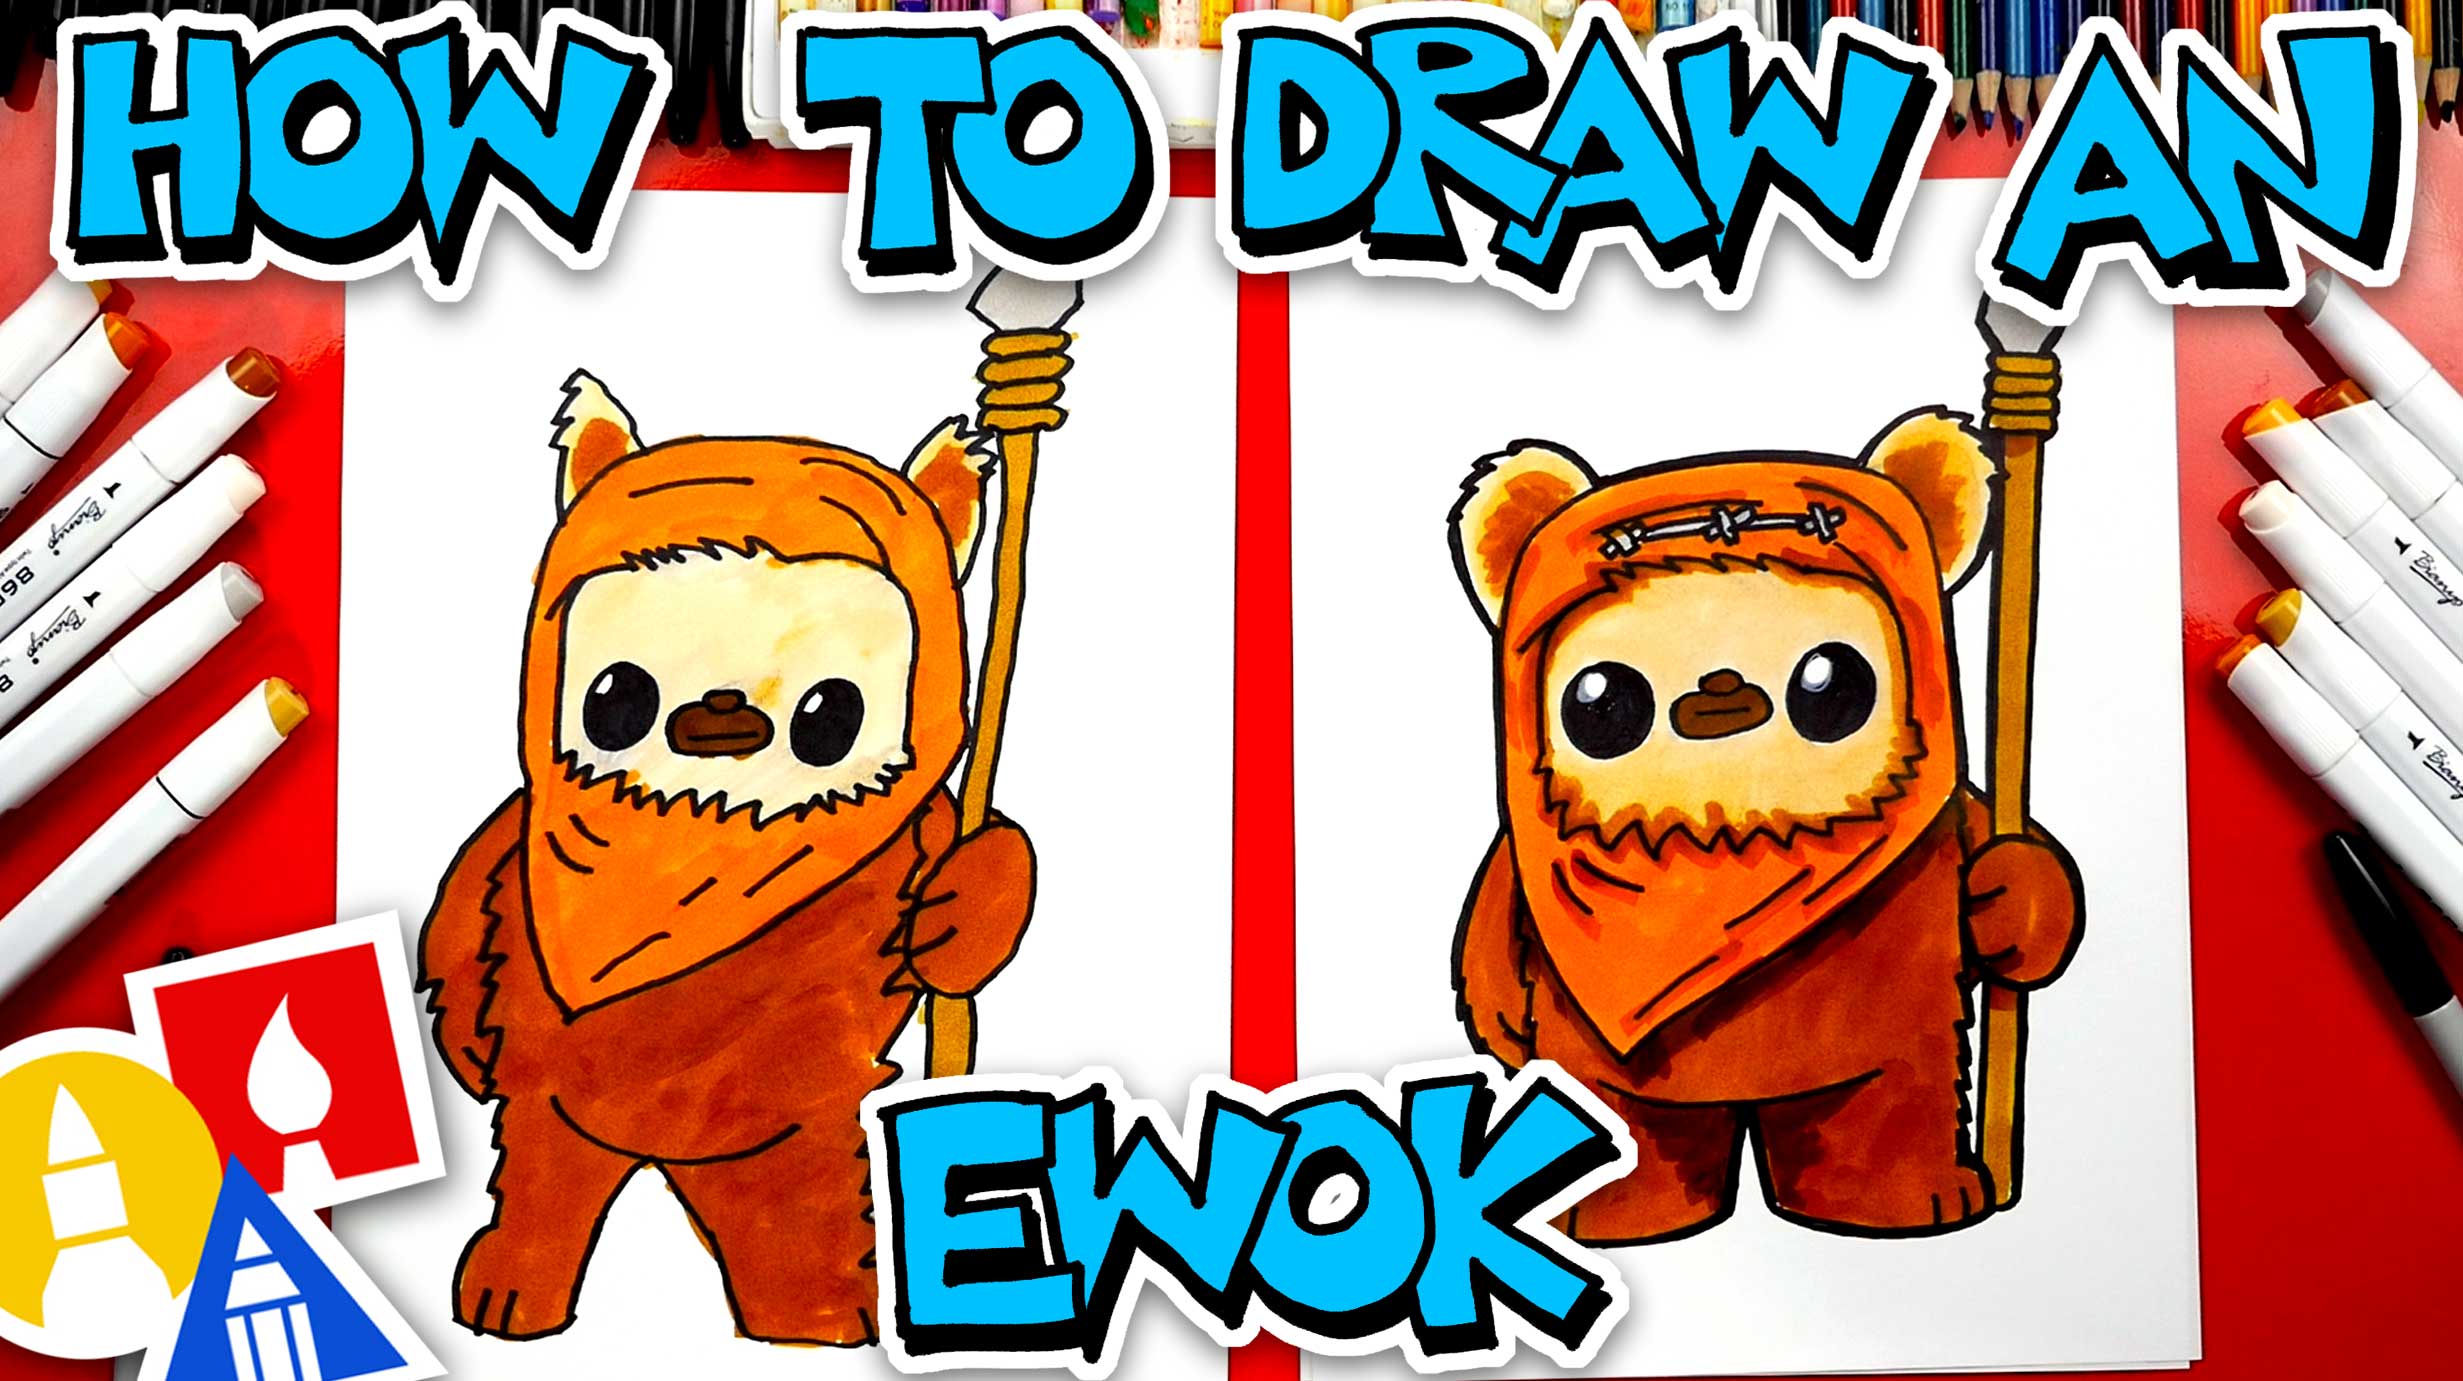 How To Draw An Ewok From Star Wars Art For Kids Hub